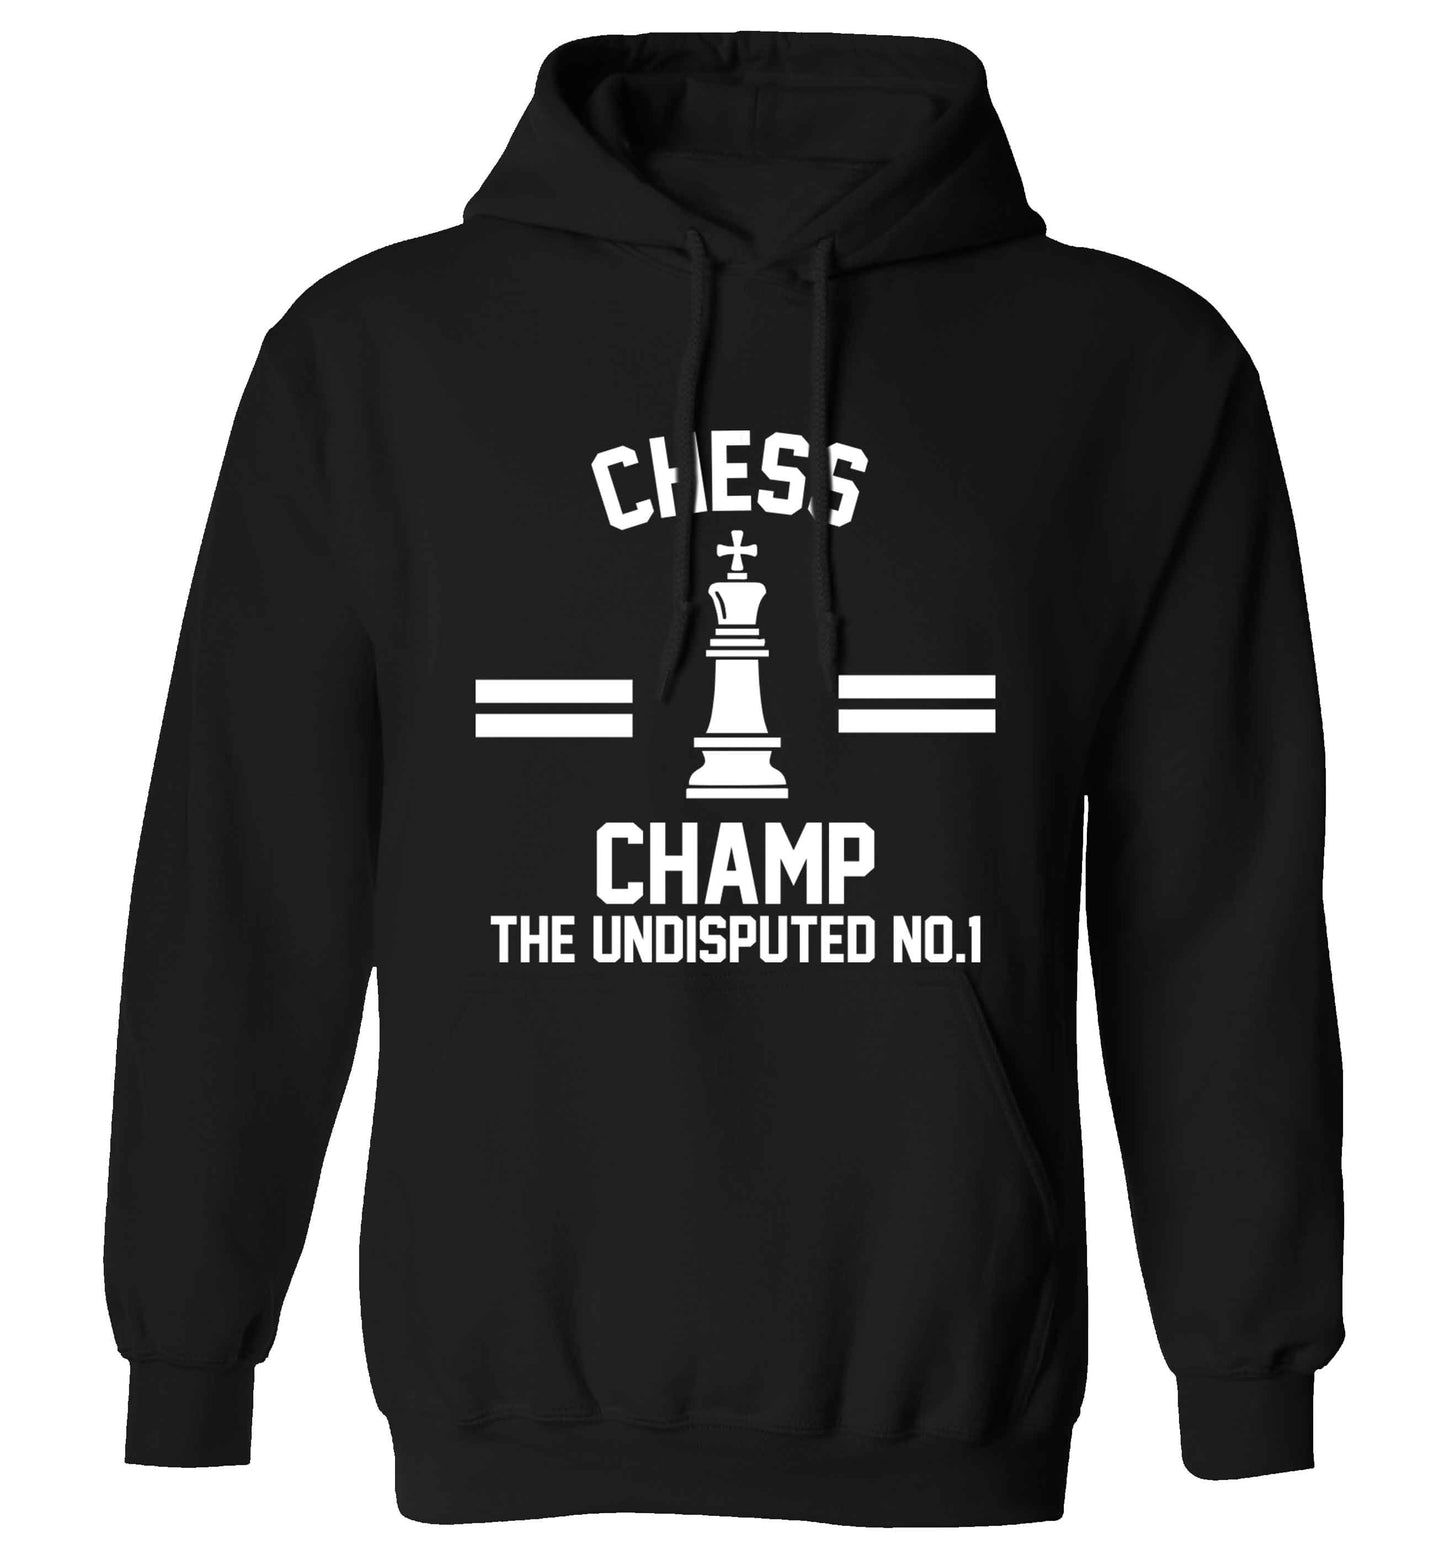 Undisputed chess championship no.1  adults unisex black hoodie 2XL